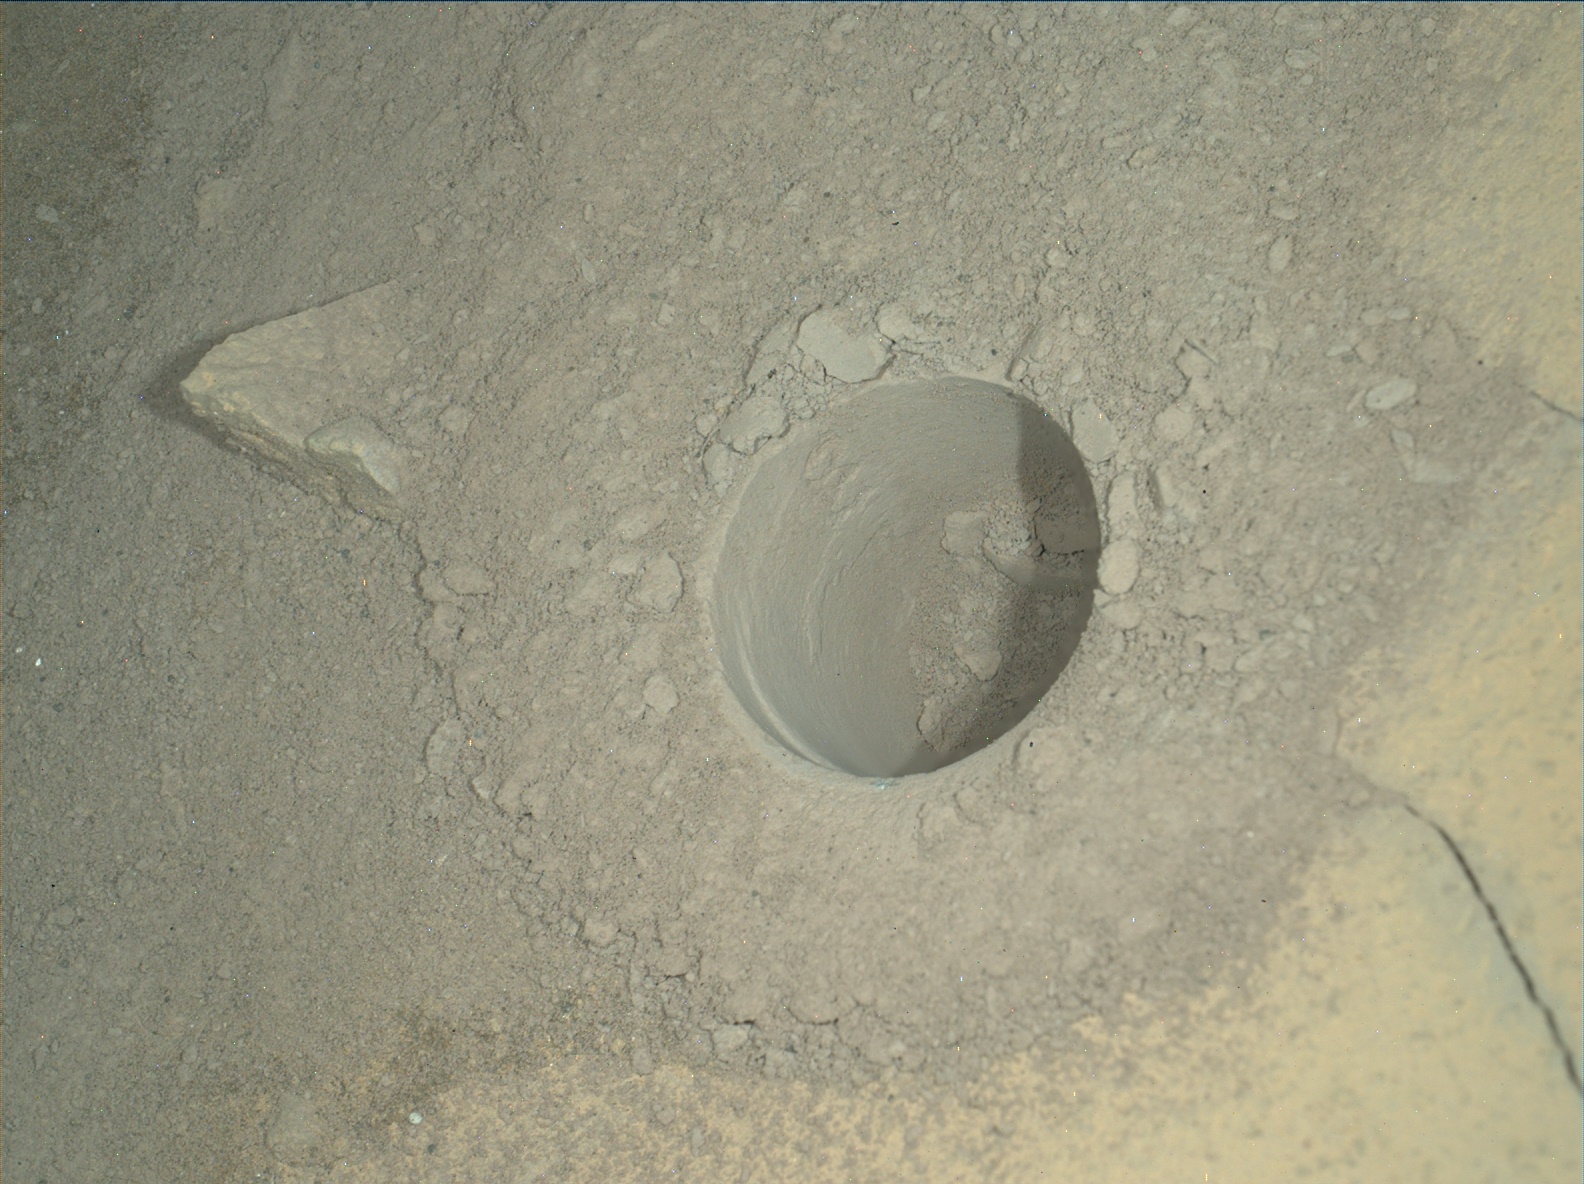 Nasa's Mars rover Curiosity acquired this image using its Mars Hand Lens Imager (MAHLI) on Sol 775